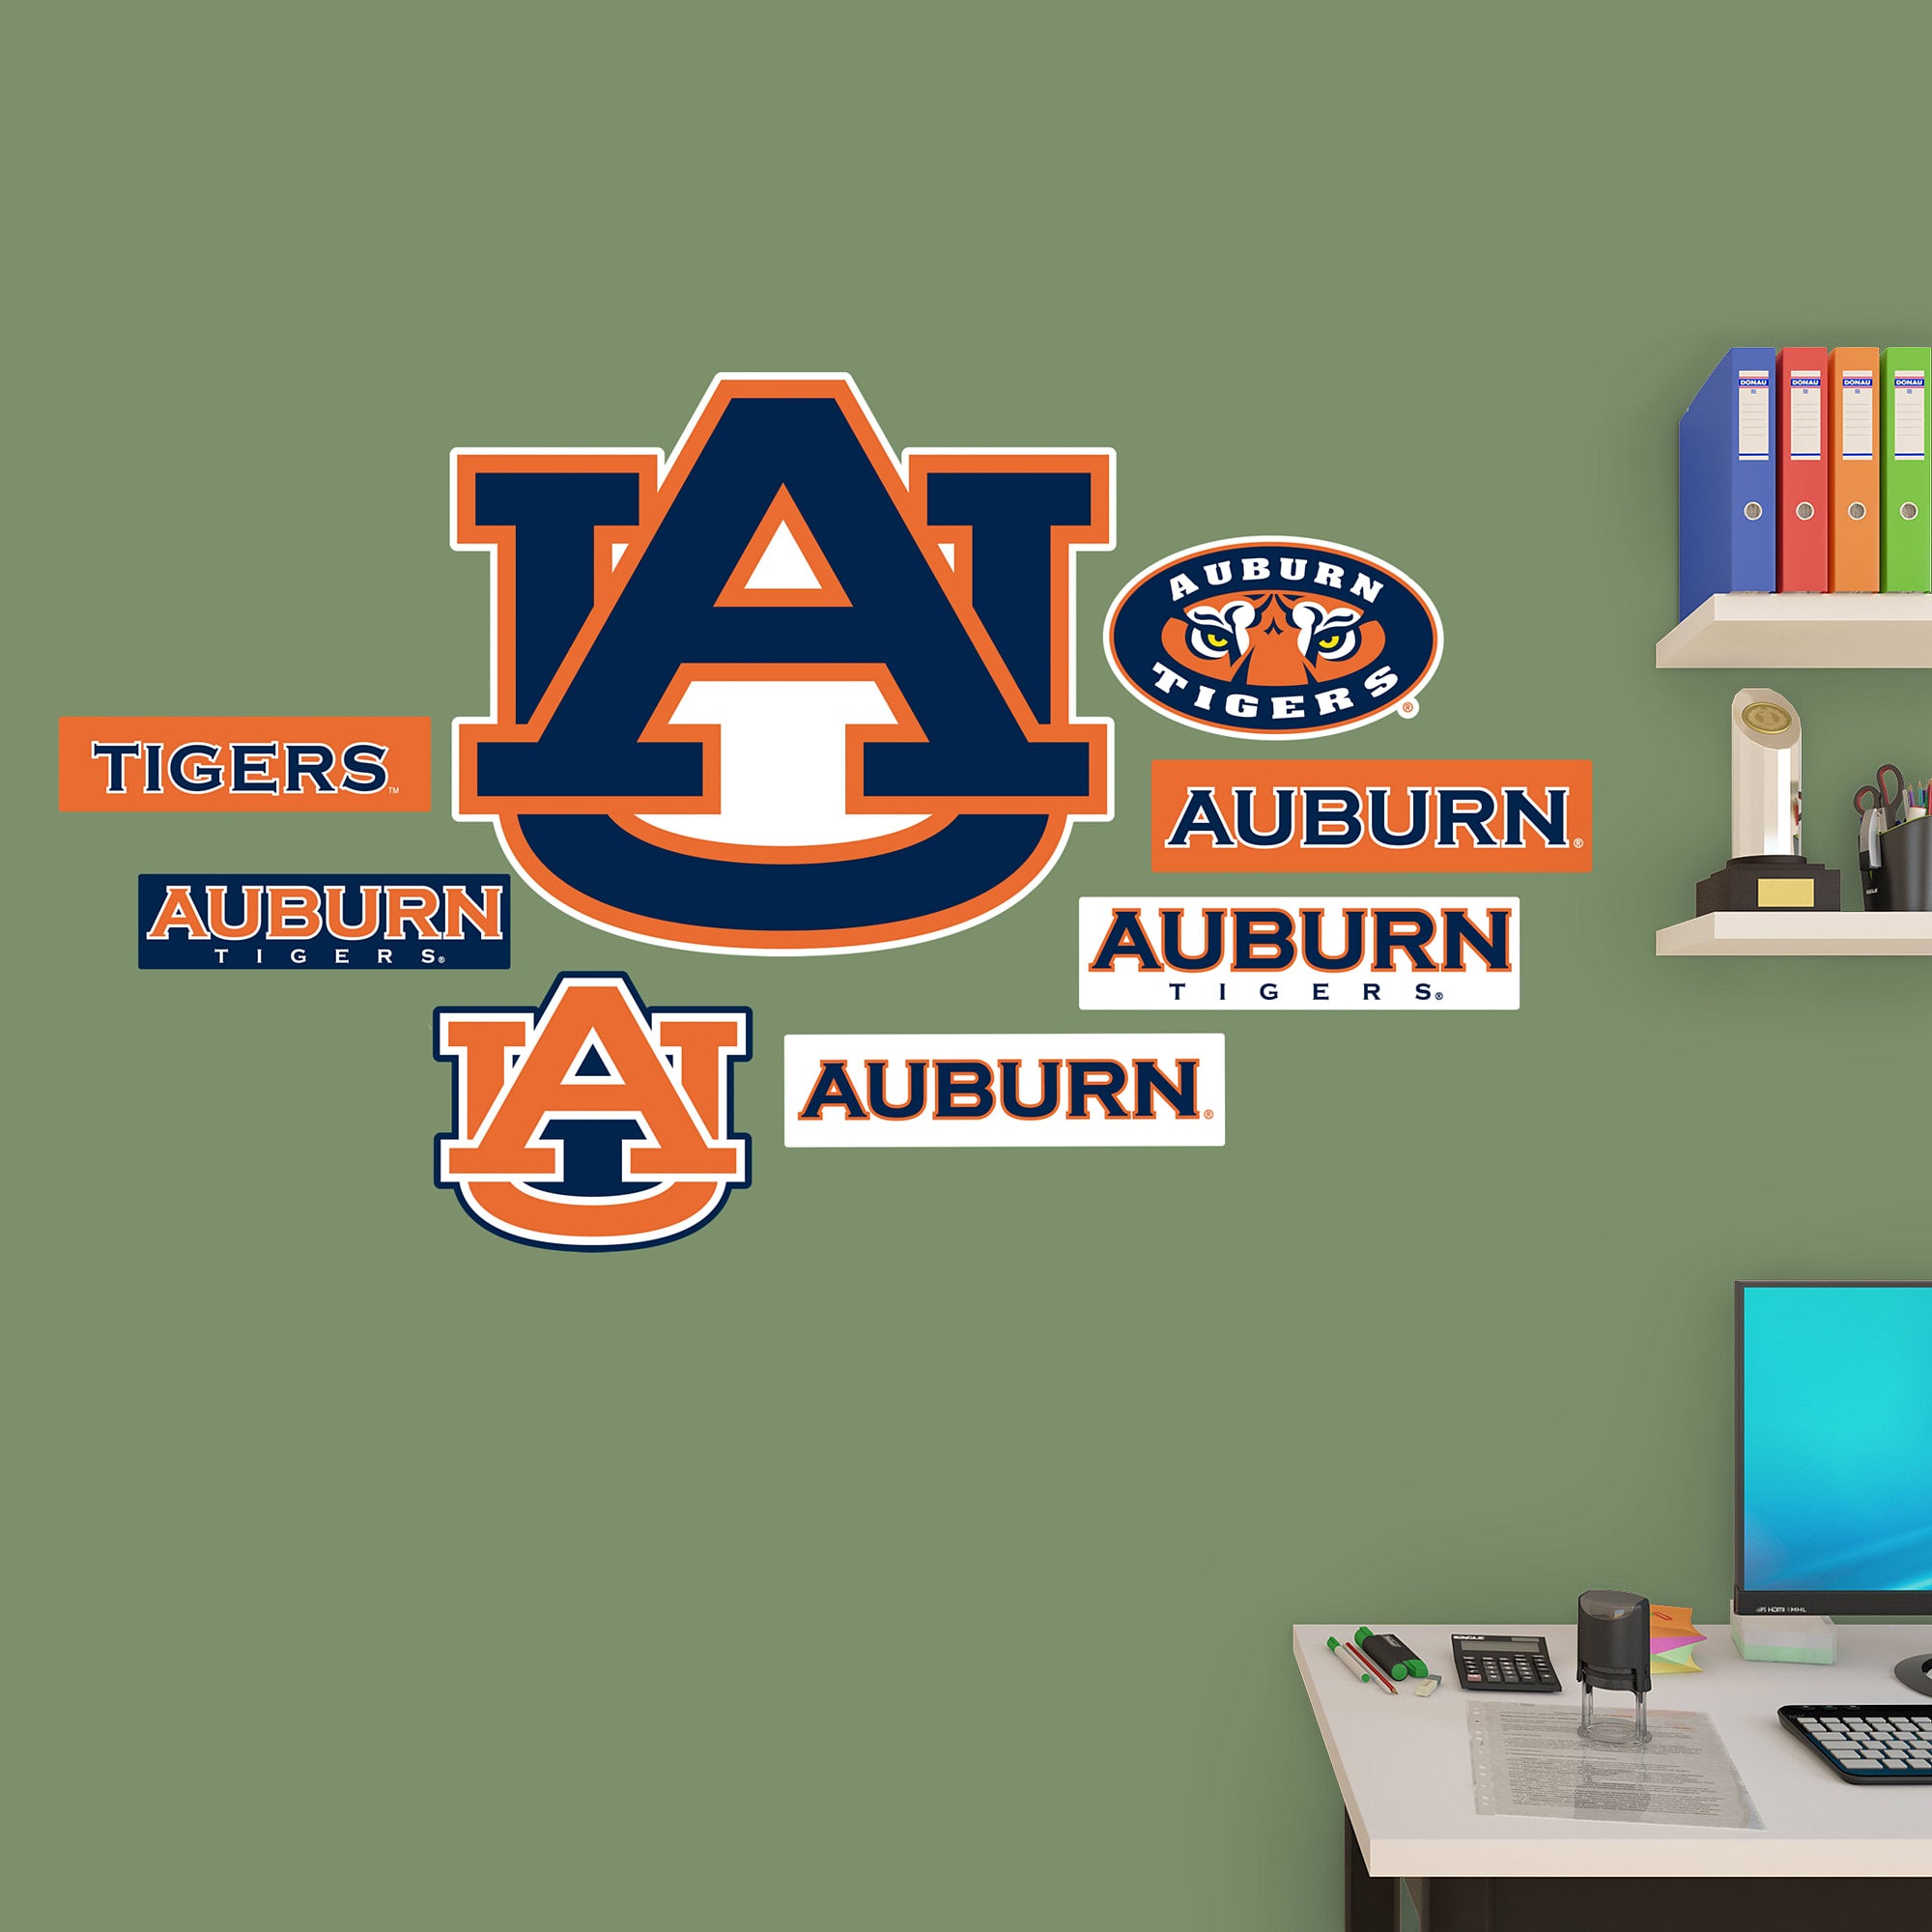 Auburn Tigers: Logo Assortment - Officially Licensed Removable Wall Decals 75"W x 39.5"H by Fathead | Vinyl